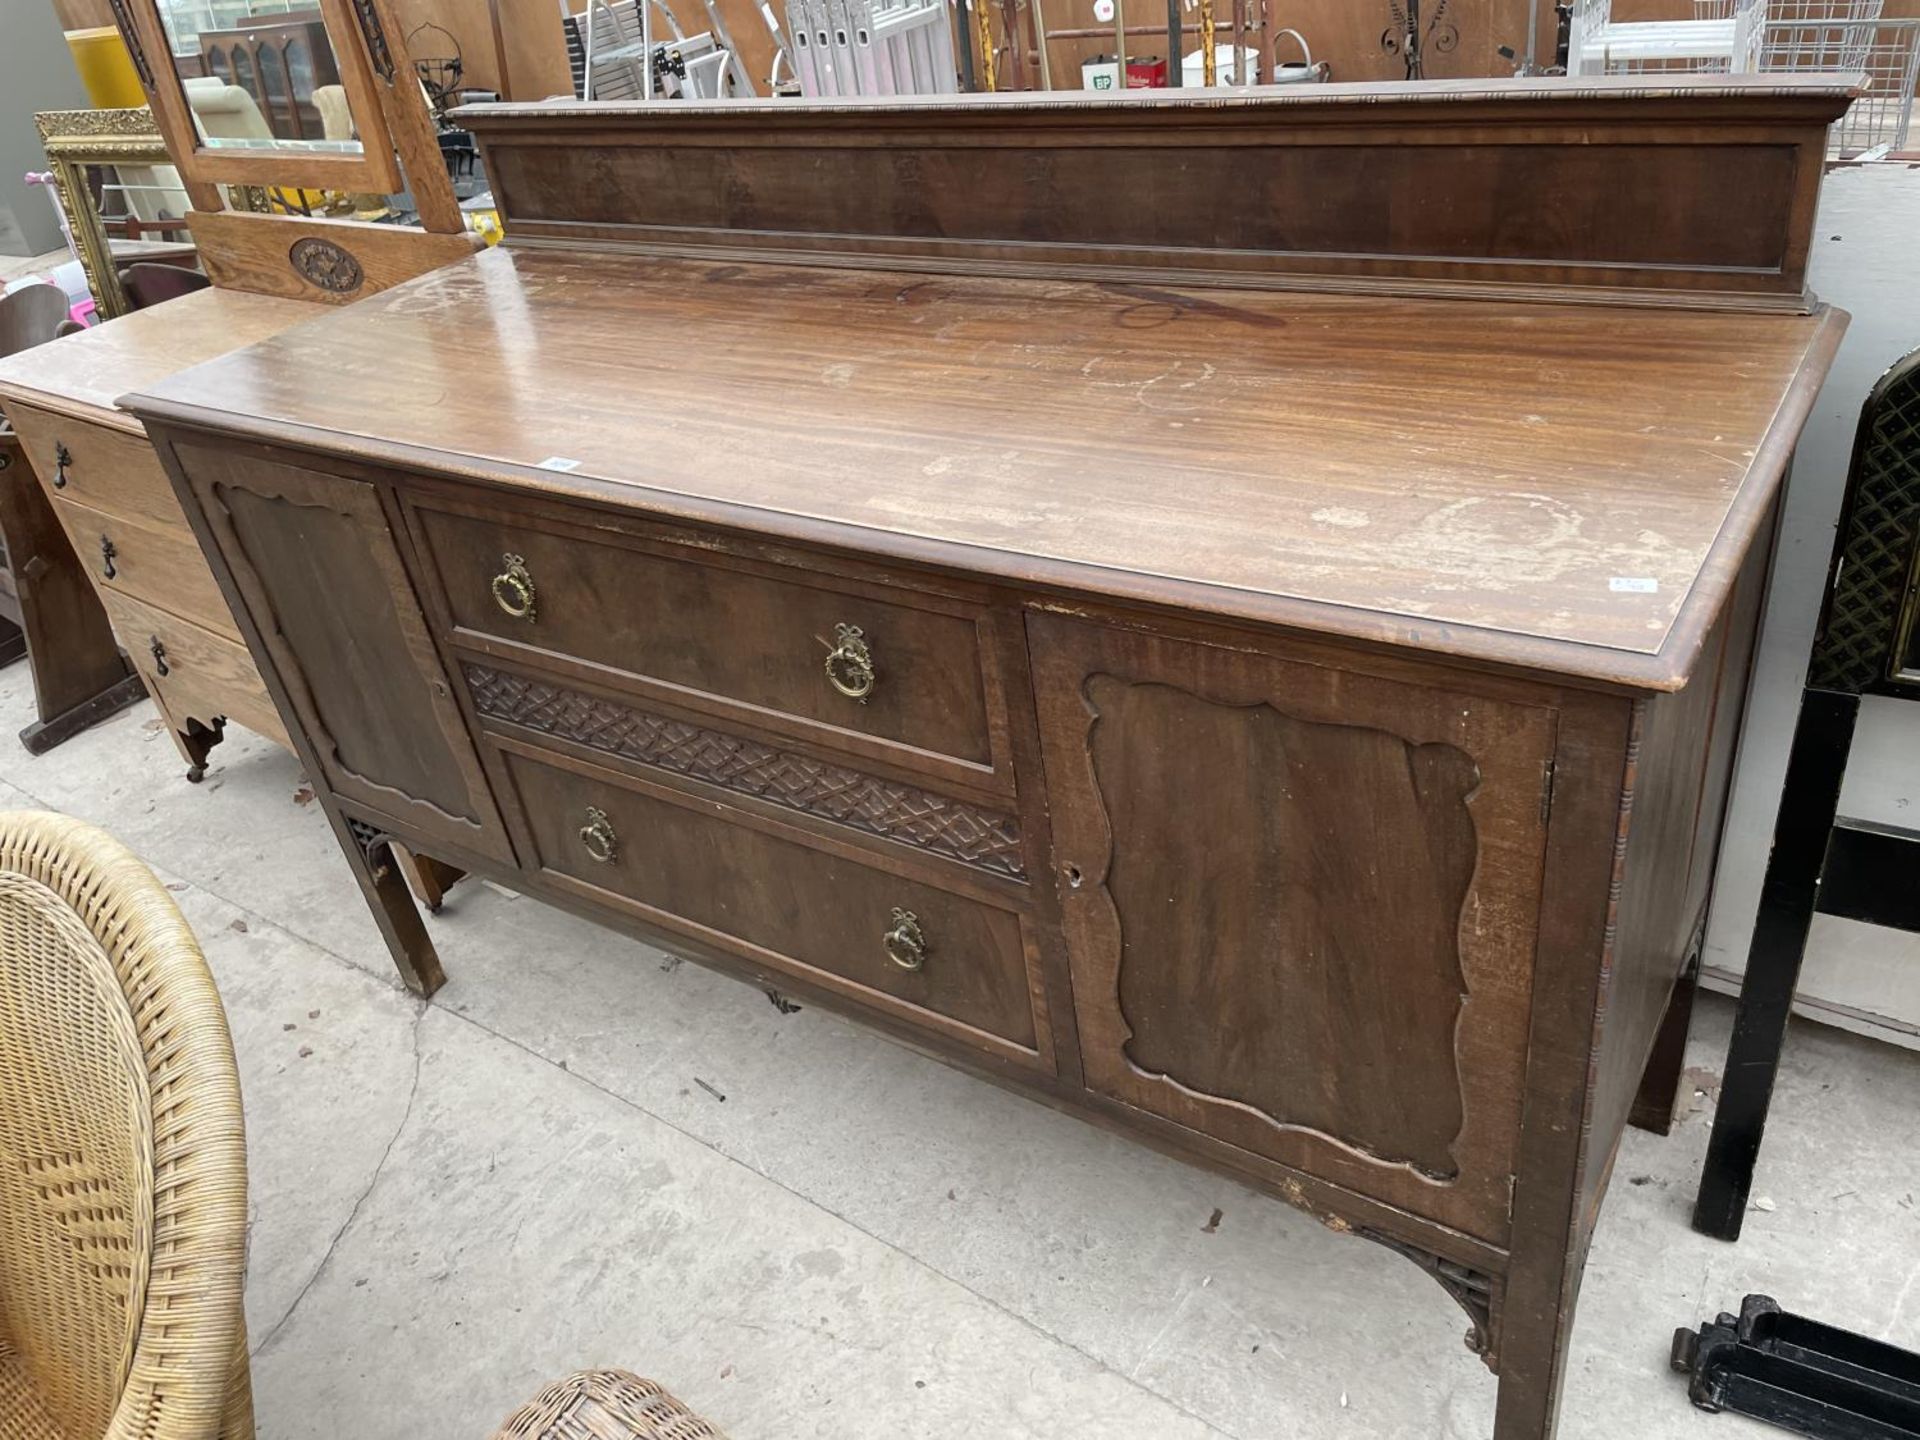 AN EDWARDIAN MAHOGANY SIDEBOARD WITH RAISED BACK, 65" WIDE